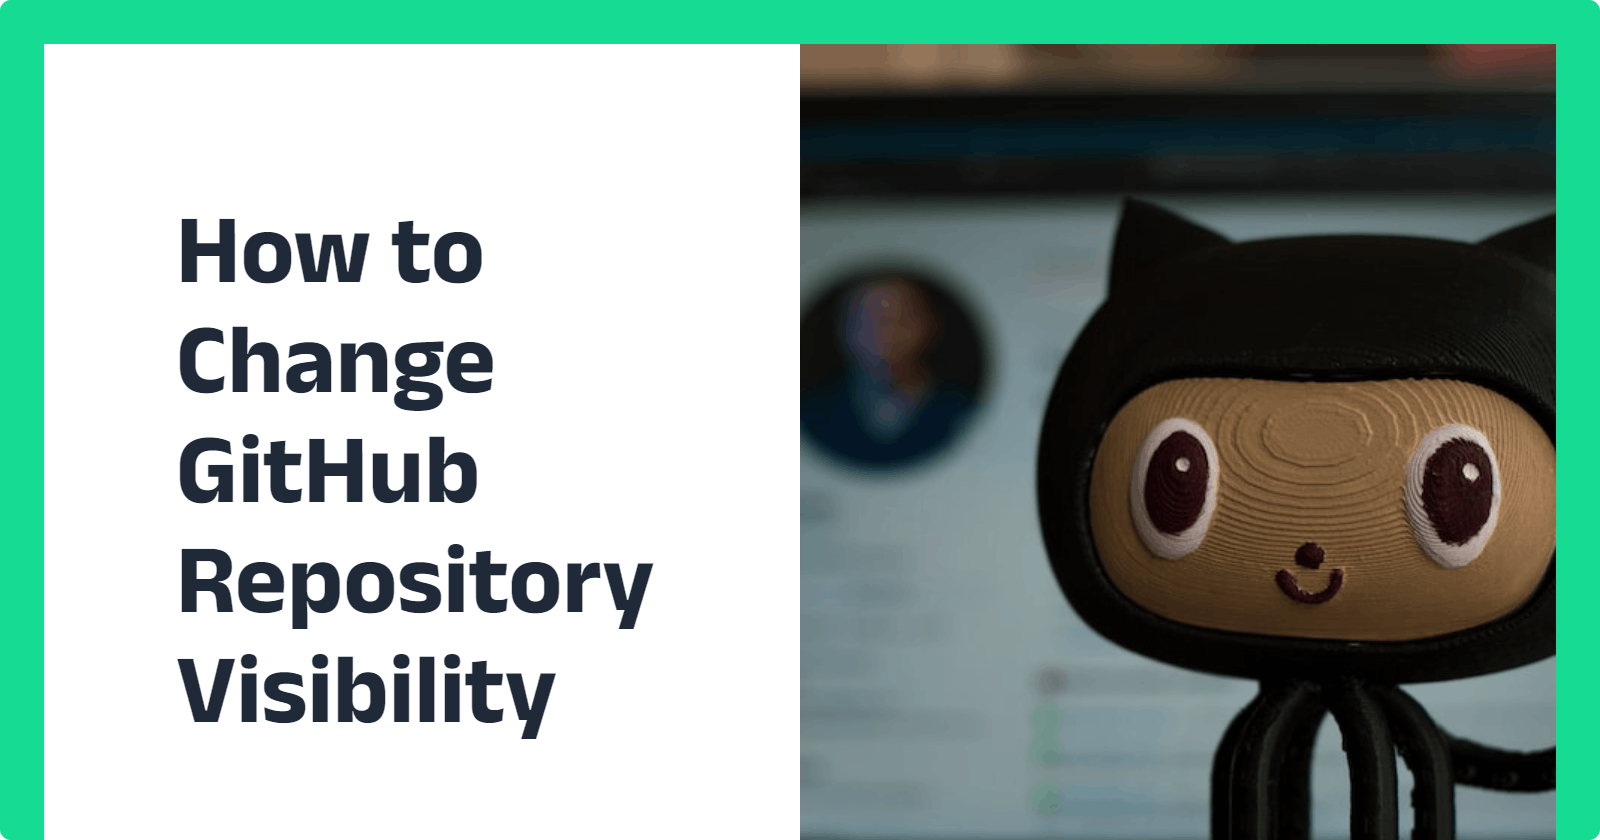 How to Change GitHub Repository Visibility